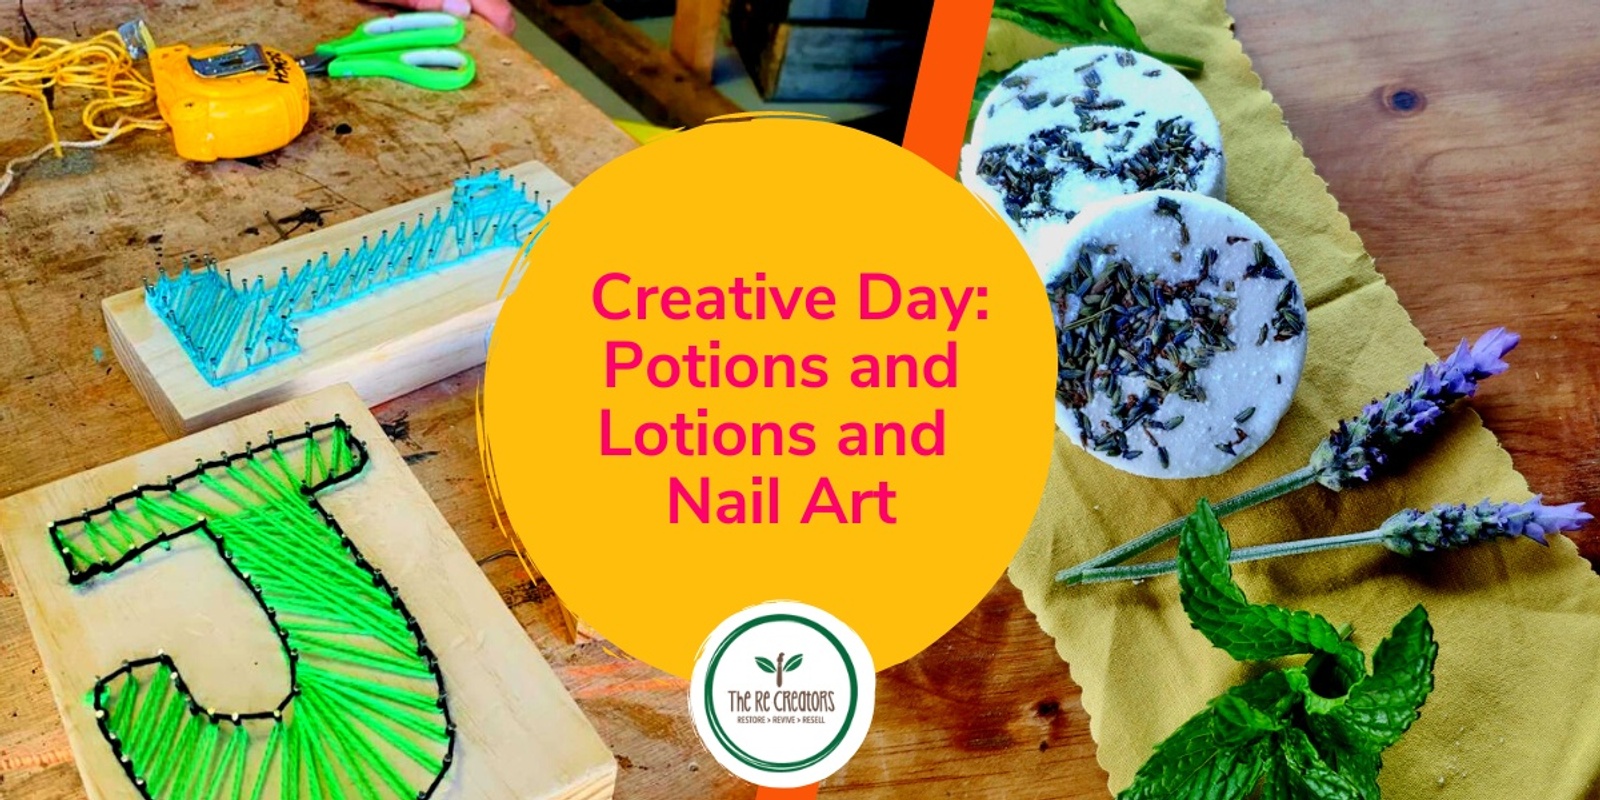 Banner image for Creative Day: Potions and Lotions and Nail Art/Wood Craft, West Auckland's RE: MAKER SPACE, Tuesday, 4 July, 10am - 4pm